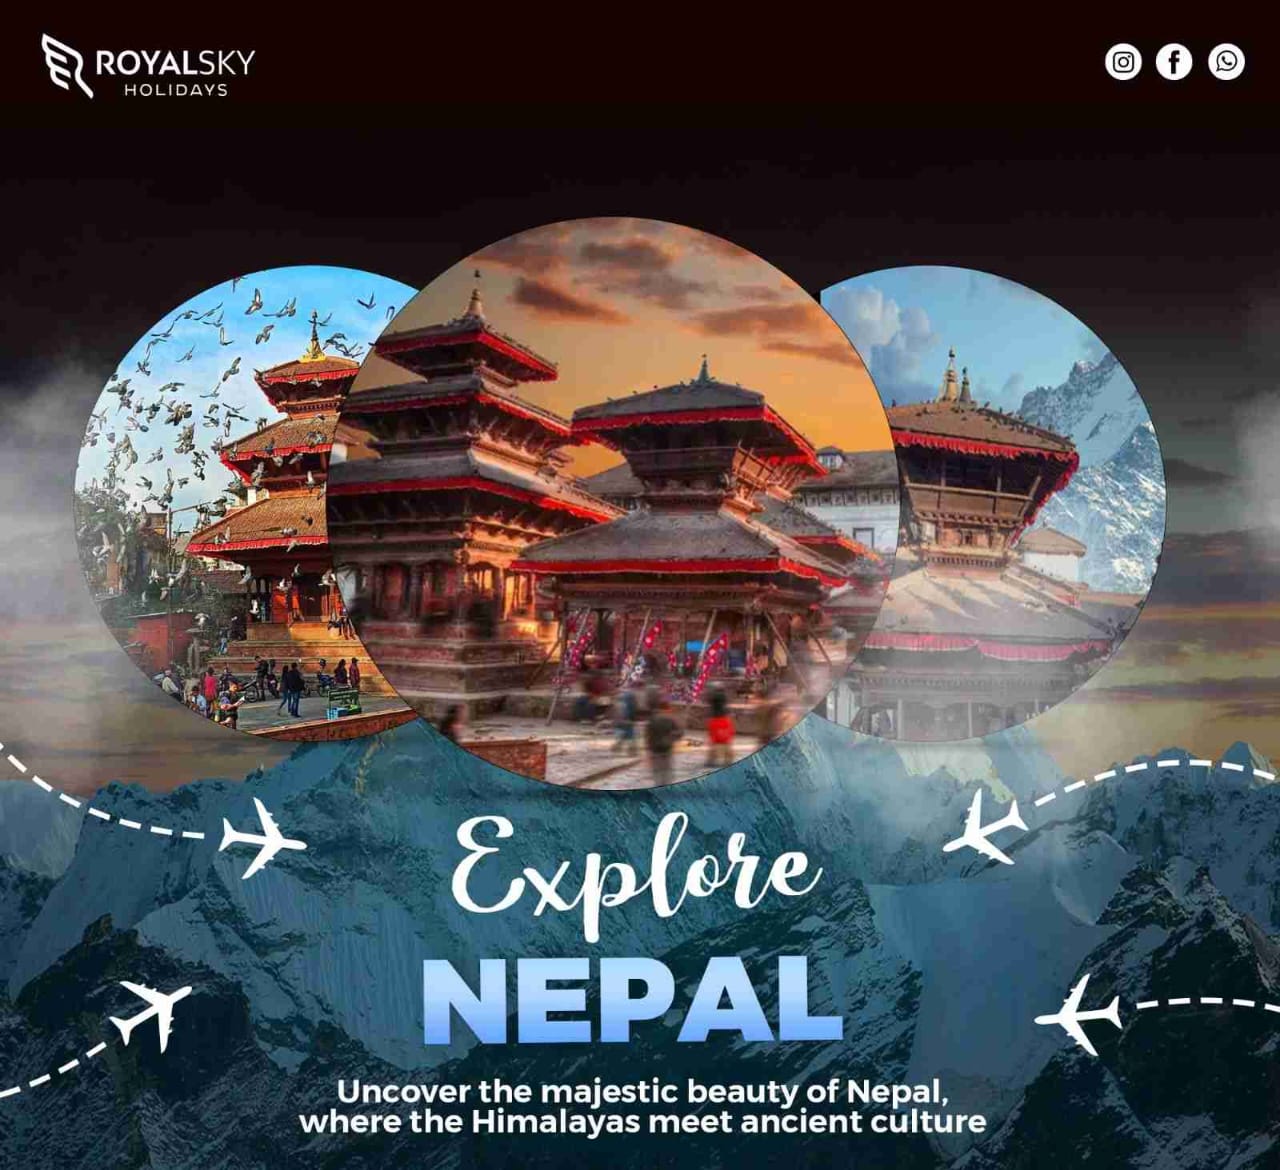 11Nepal trip - exciting tour packages from Kerala